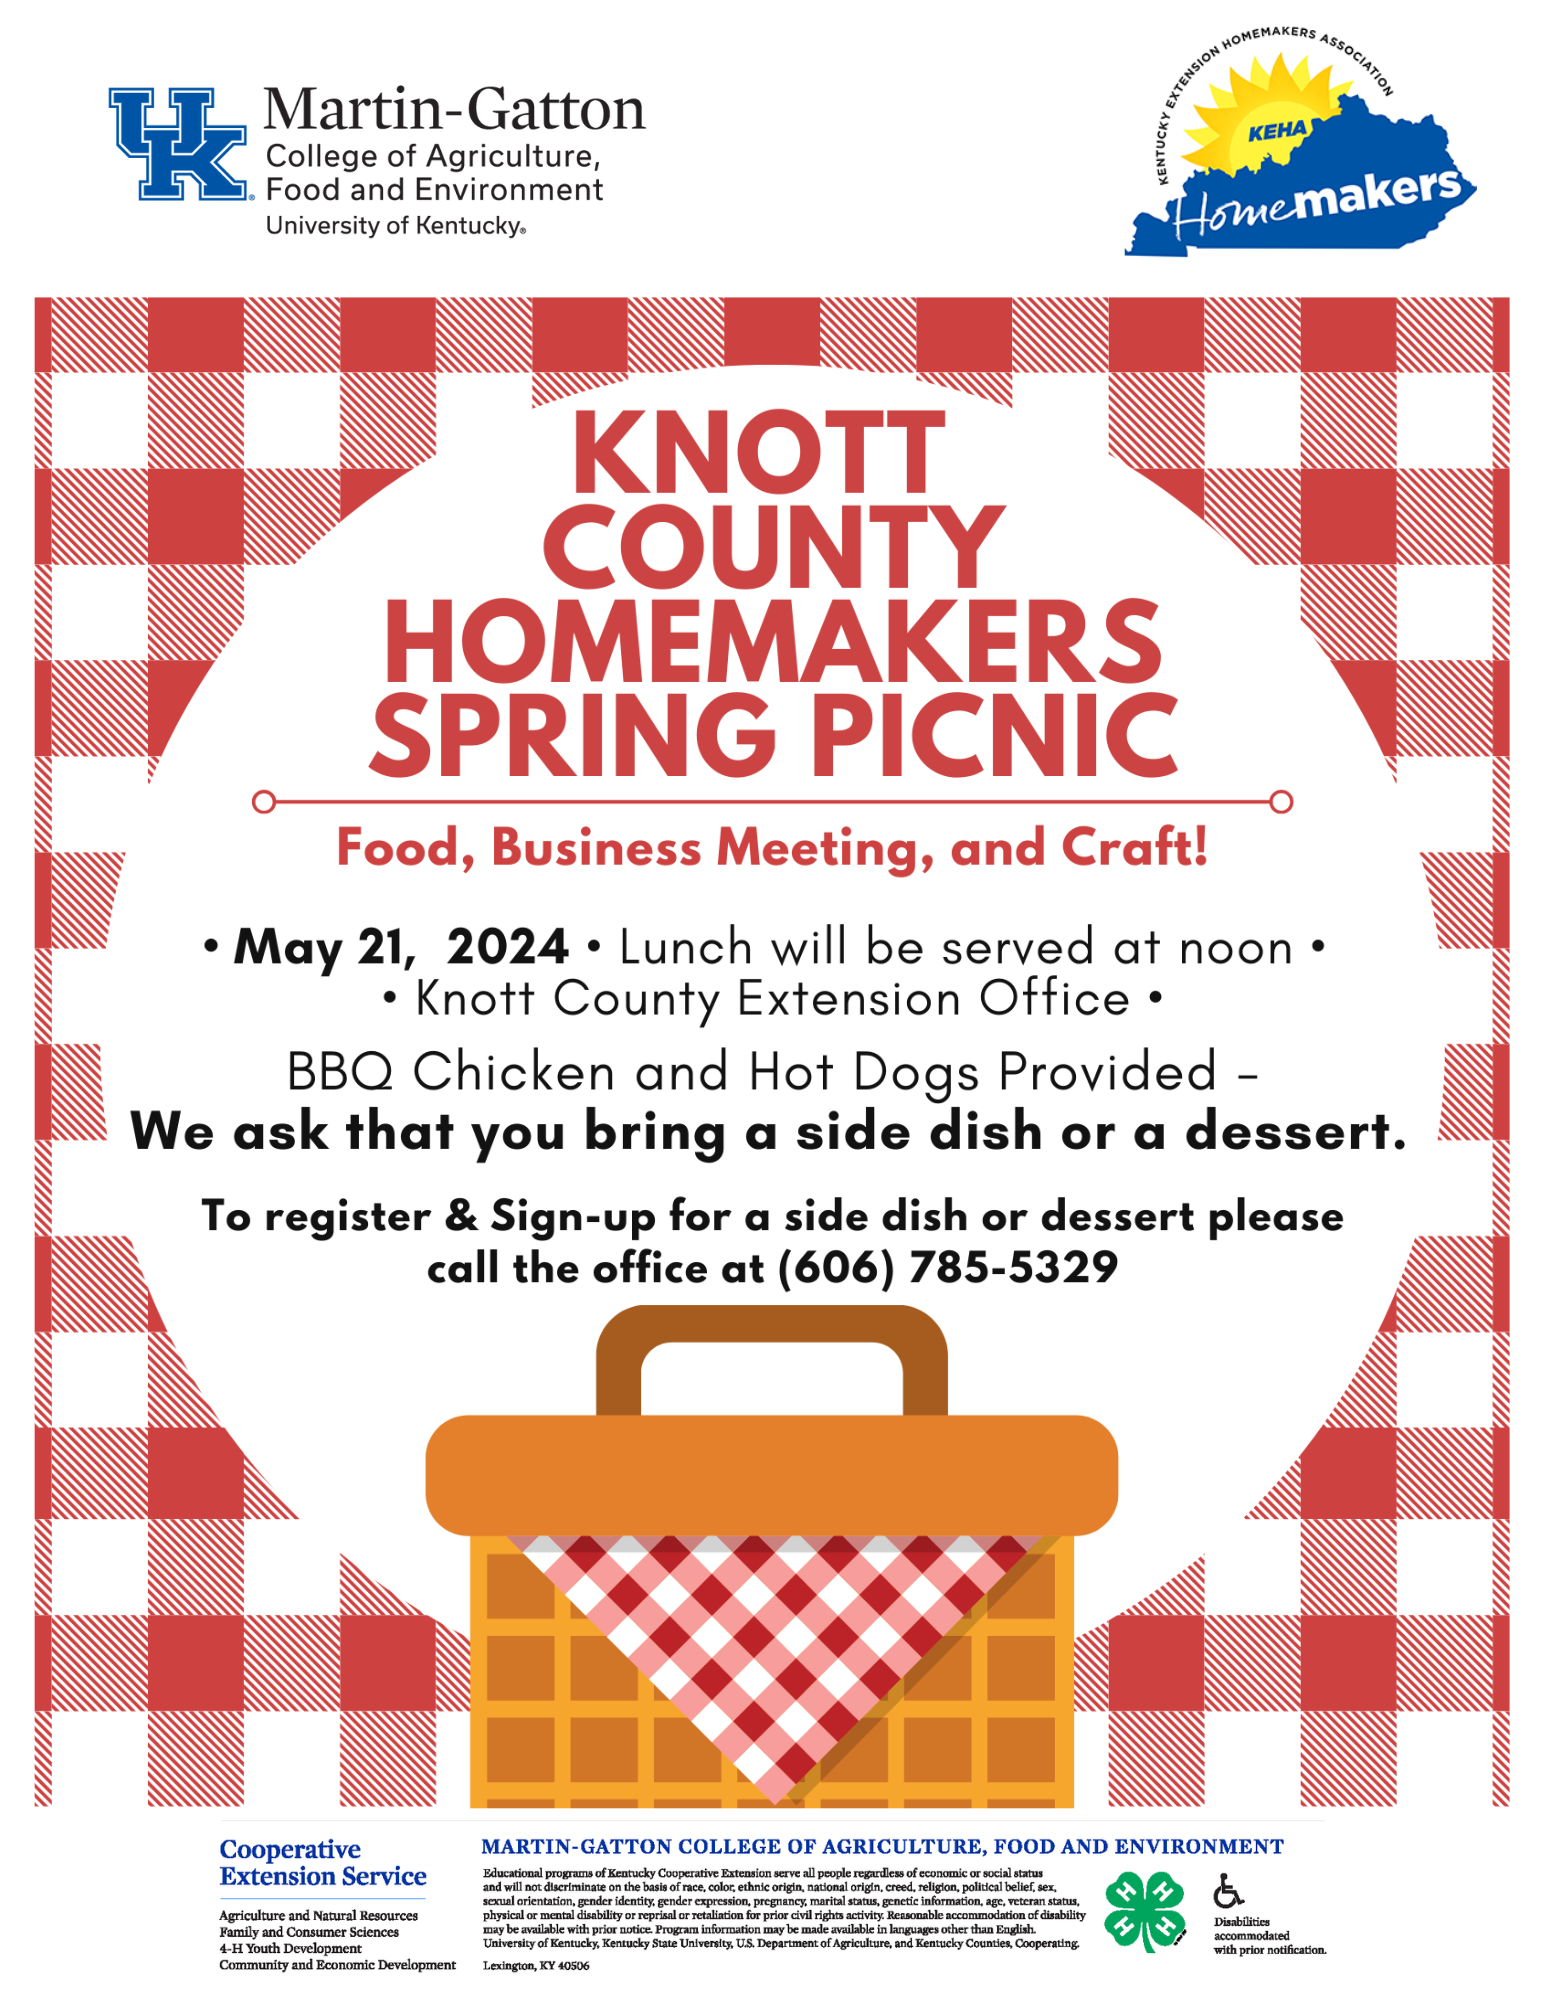 Knott County Homemakers Spring Picnic Flyer